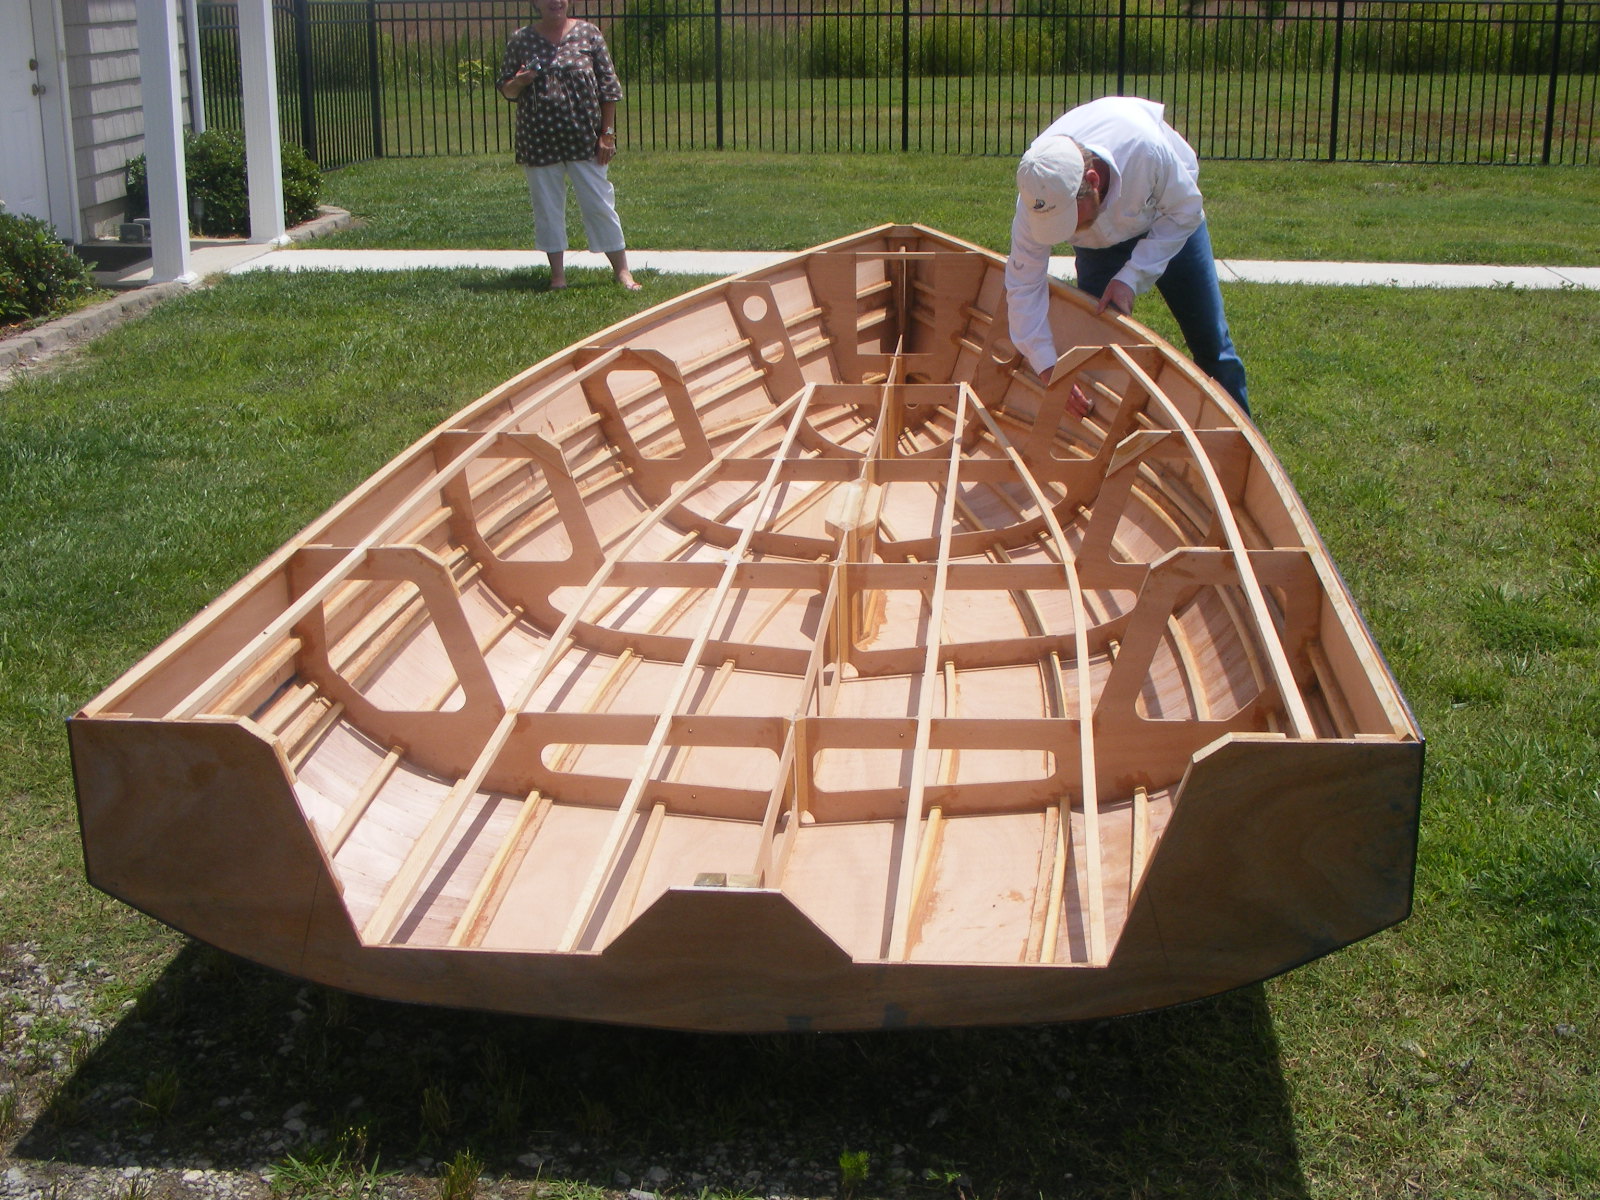 Woodworking plywood boat designs PDF Free Download